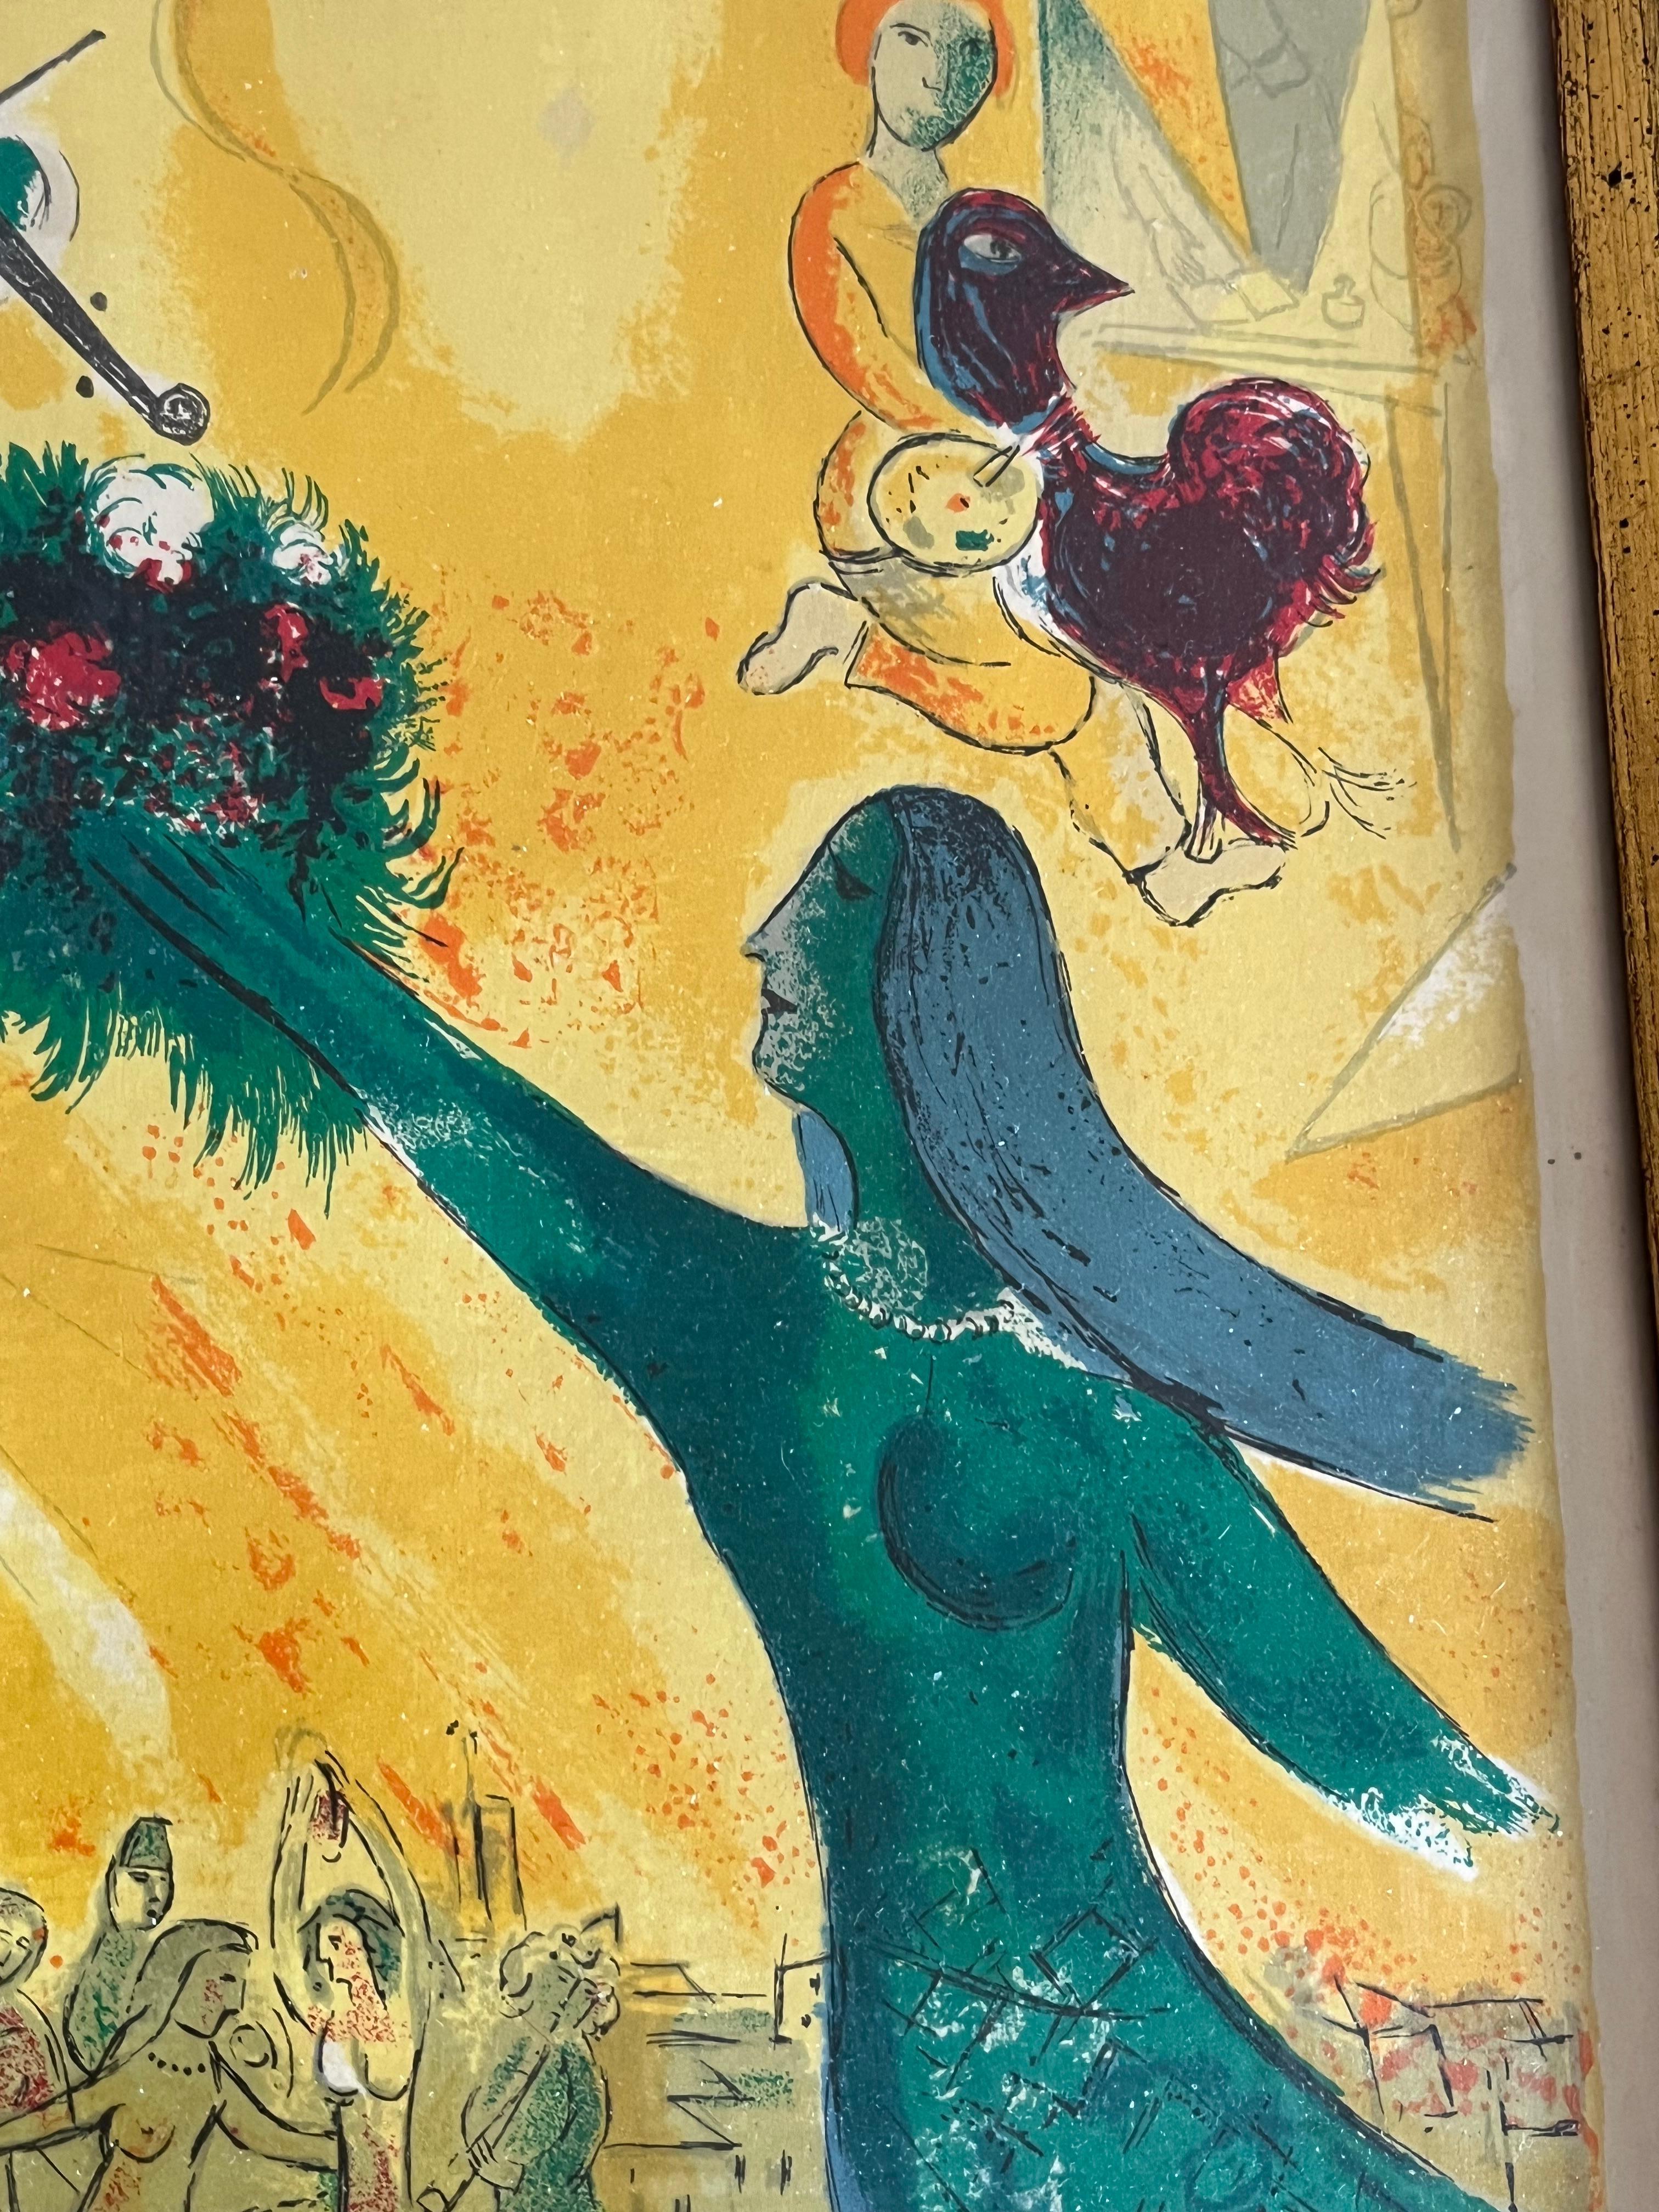 Marc Chagall “The Dance” 1950 Litho In Good Condition For Sale In Doylestown, PA